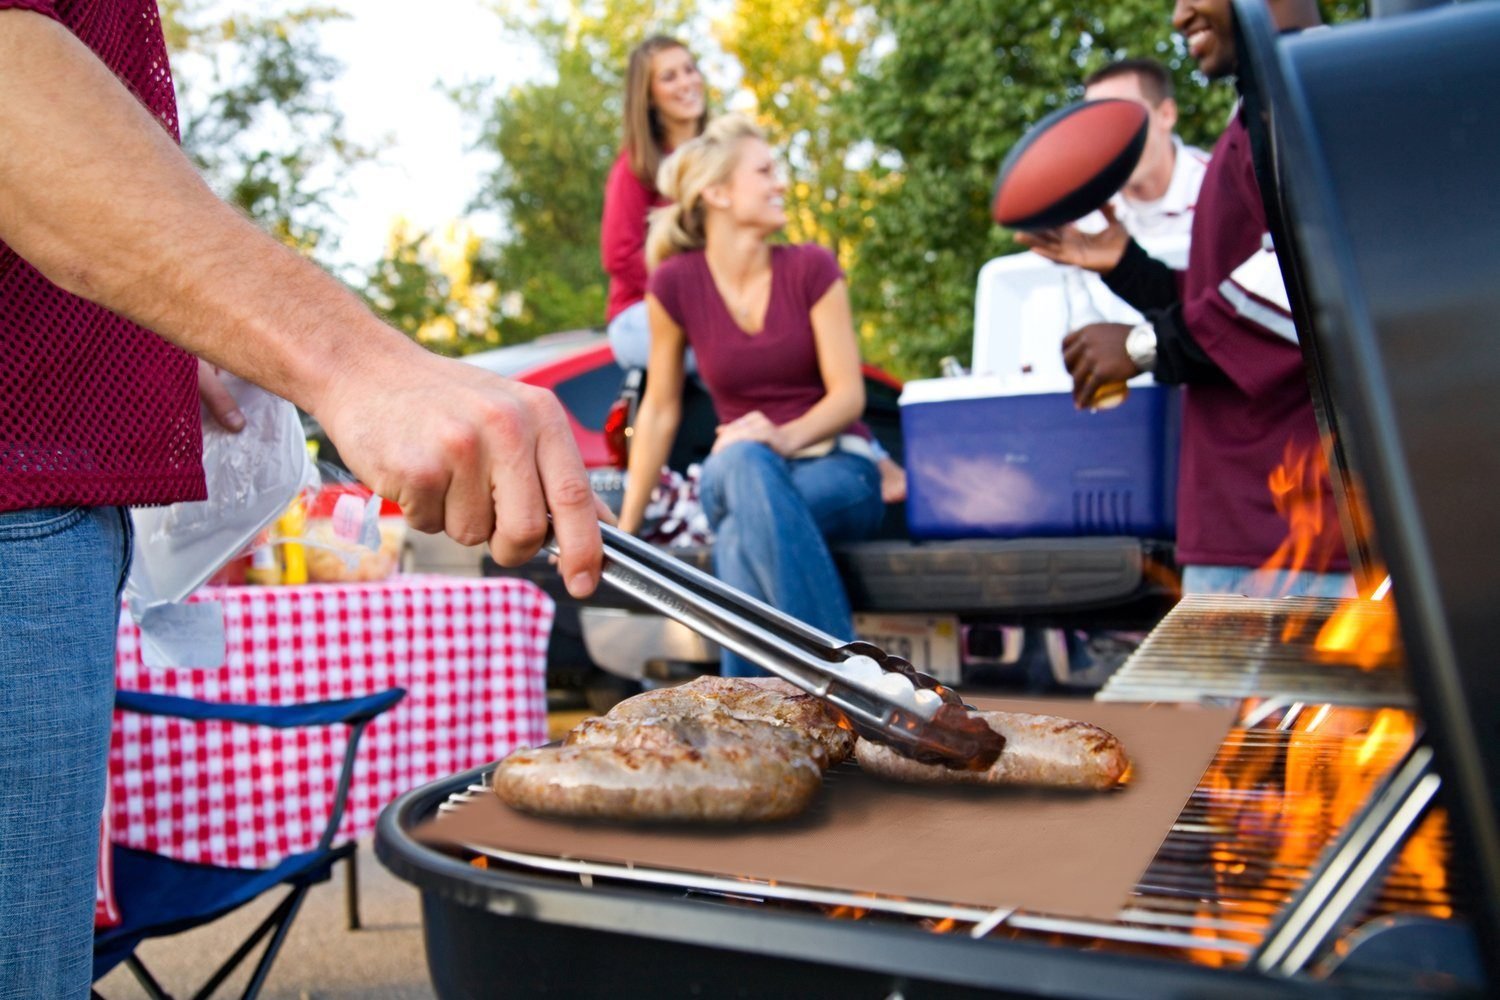 Use tin foil on your BBQ? Here's a very serious reason why you shouldn't